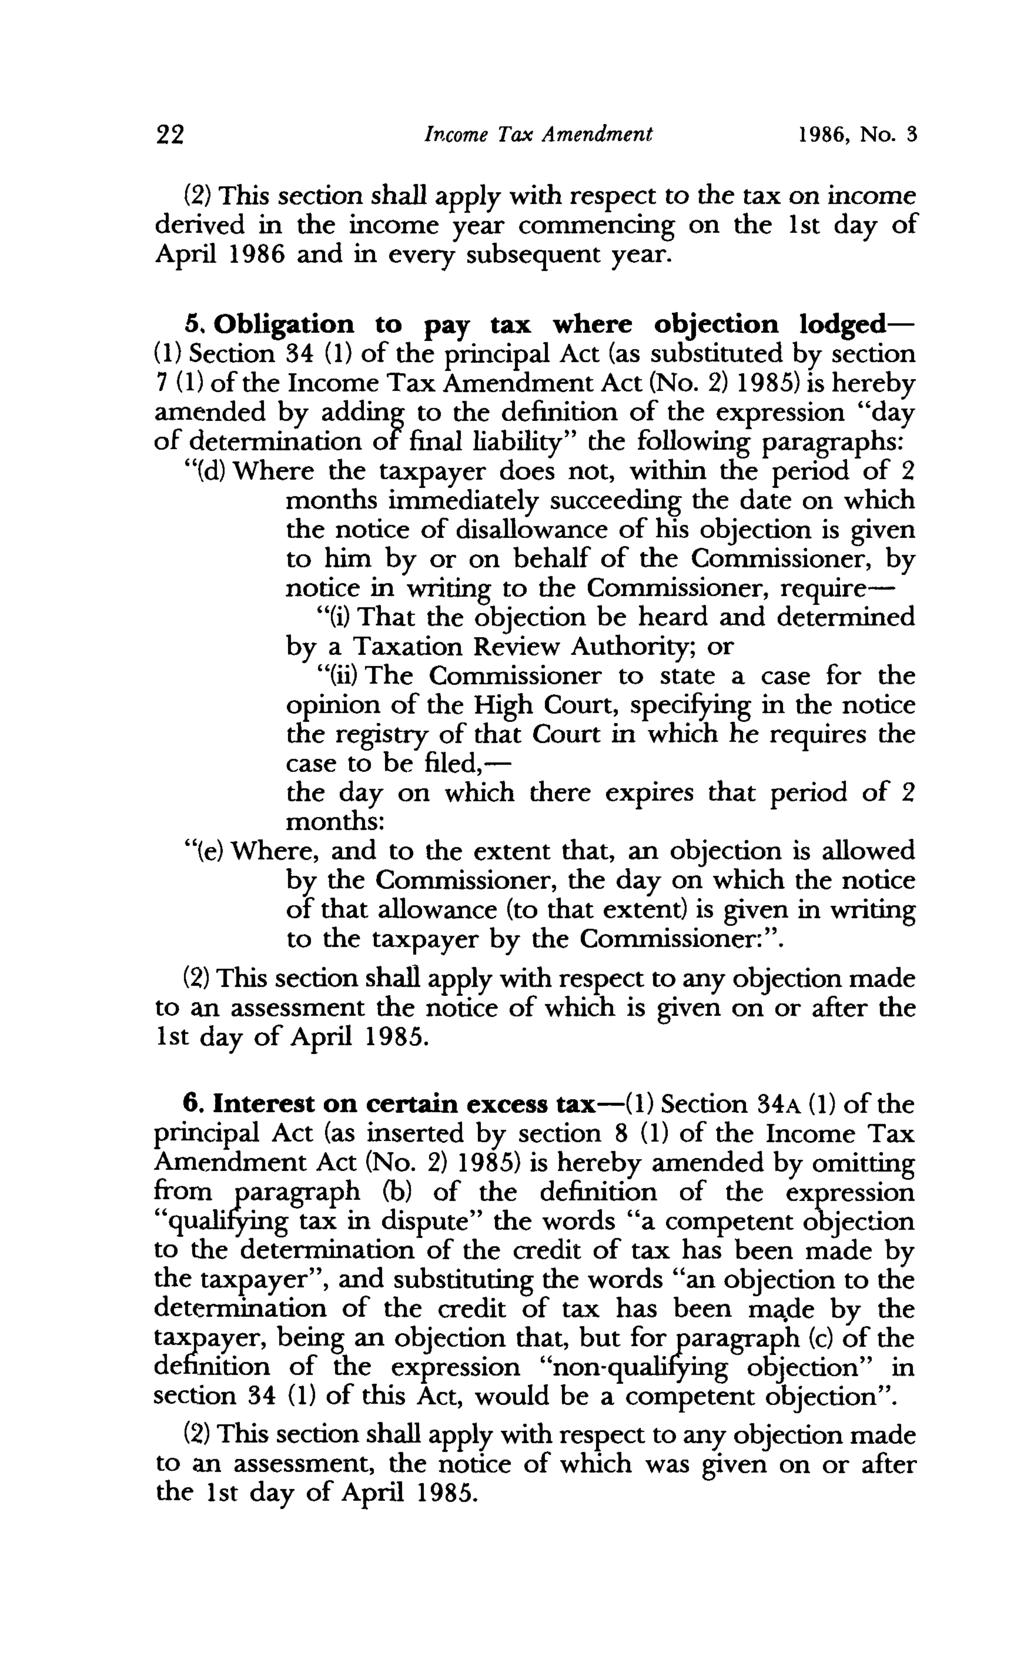 22 Income Tax Amendment 1986, No. 3 (2) This section shall apply with respect to the tax on income derived in the income year commencing on the 1 st day of April 1986 and in every subsequent year. 5.